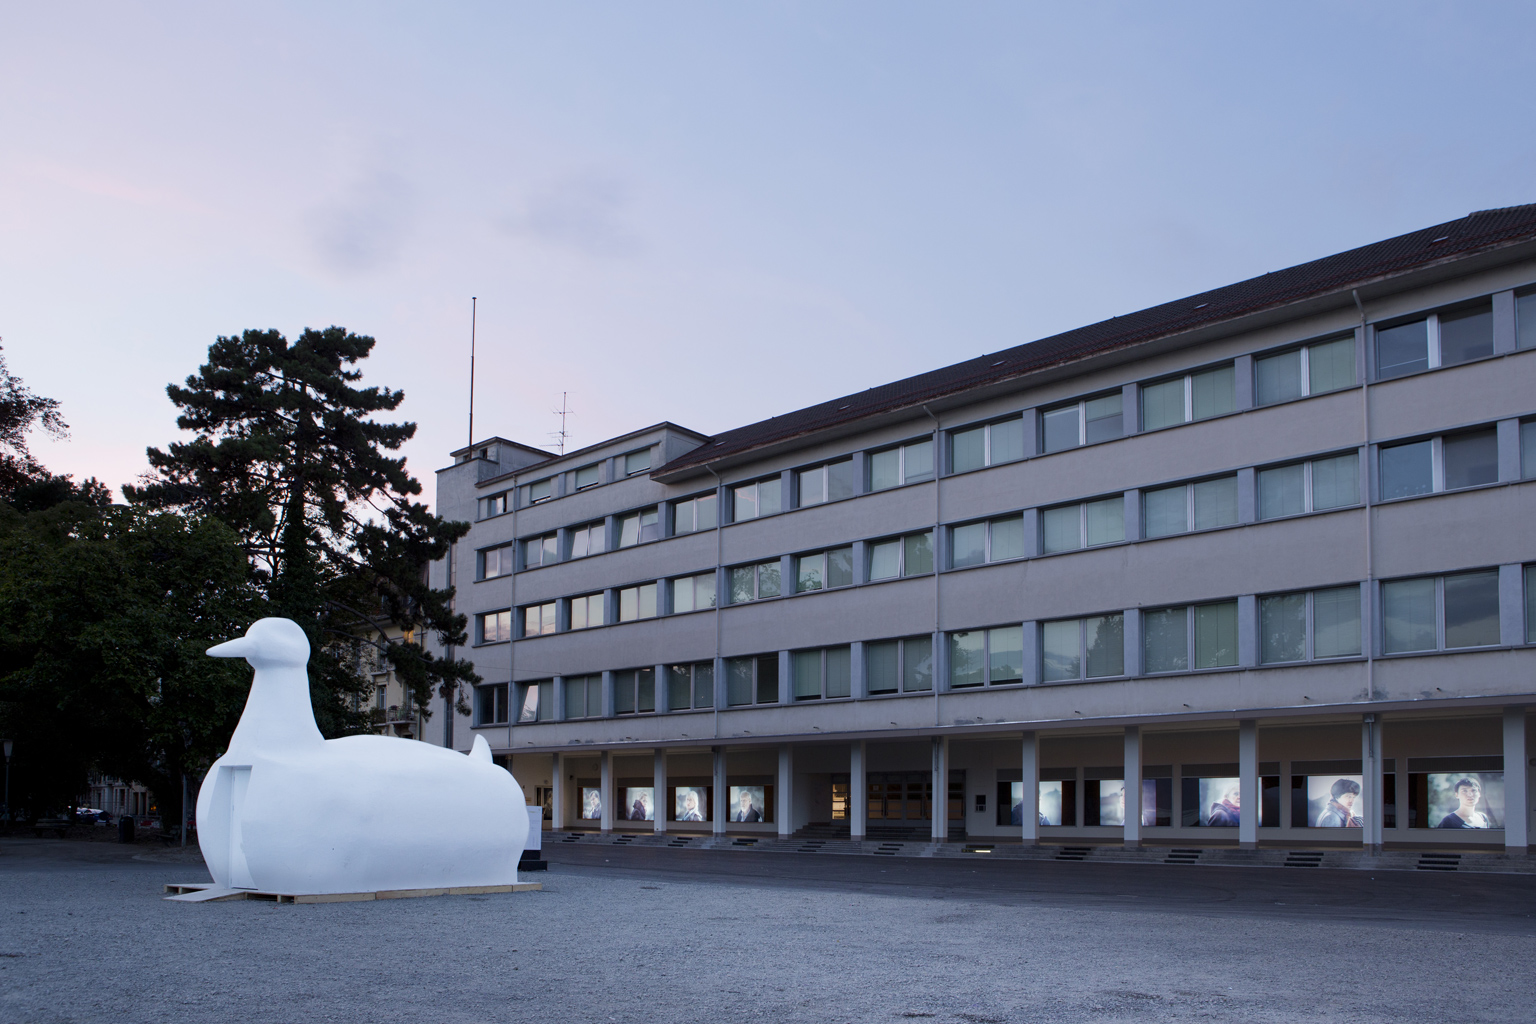 The Big DUCK, Olivier Cablat. Images 2014